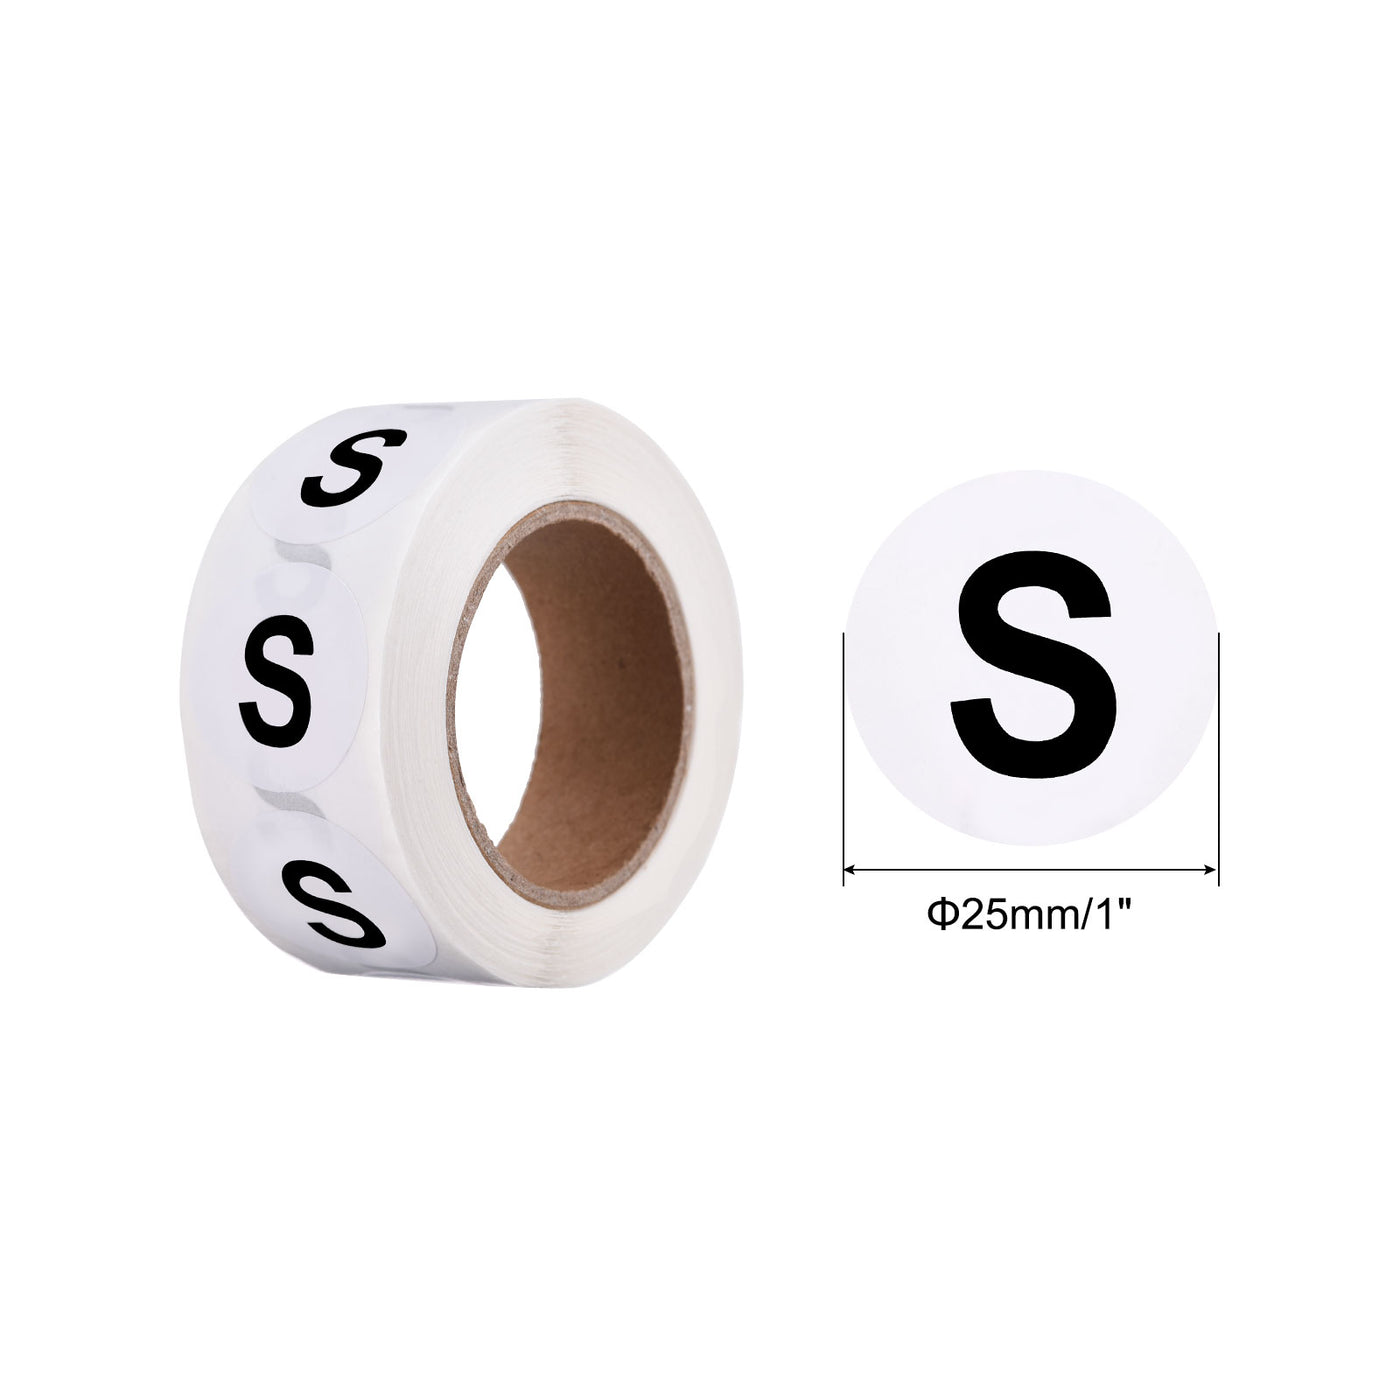 Harfington Clothing S Small Size Sticker Label Coding Label 25mm/1inch Dia 1 Roll 500 Round Adhesive Labels for Clothes Apparel